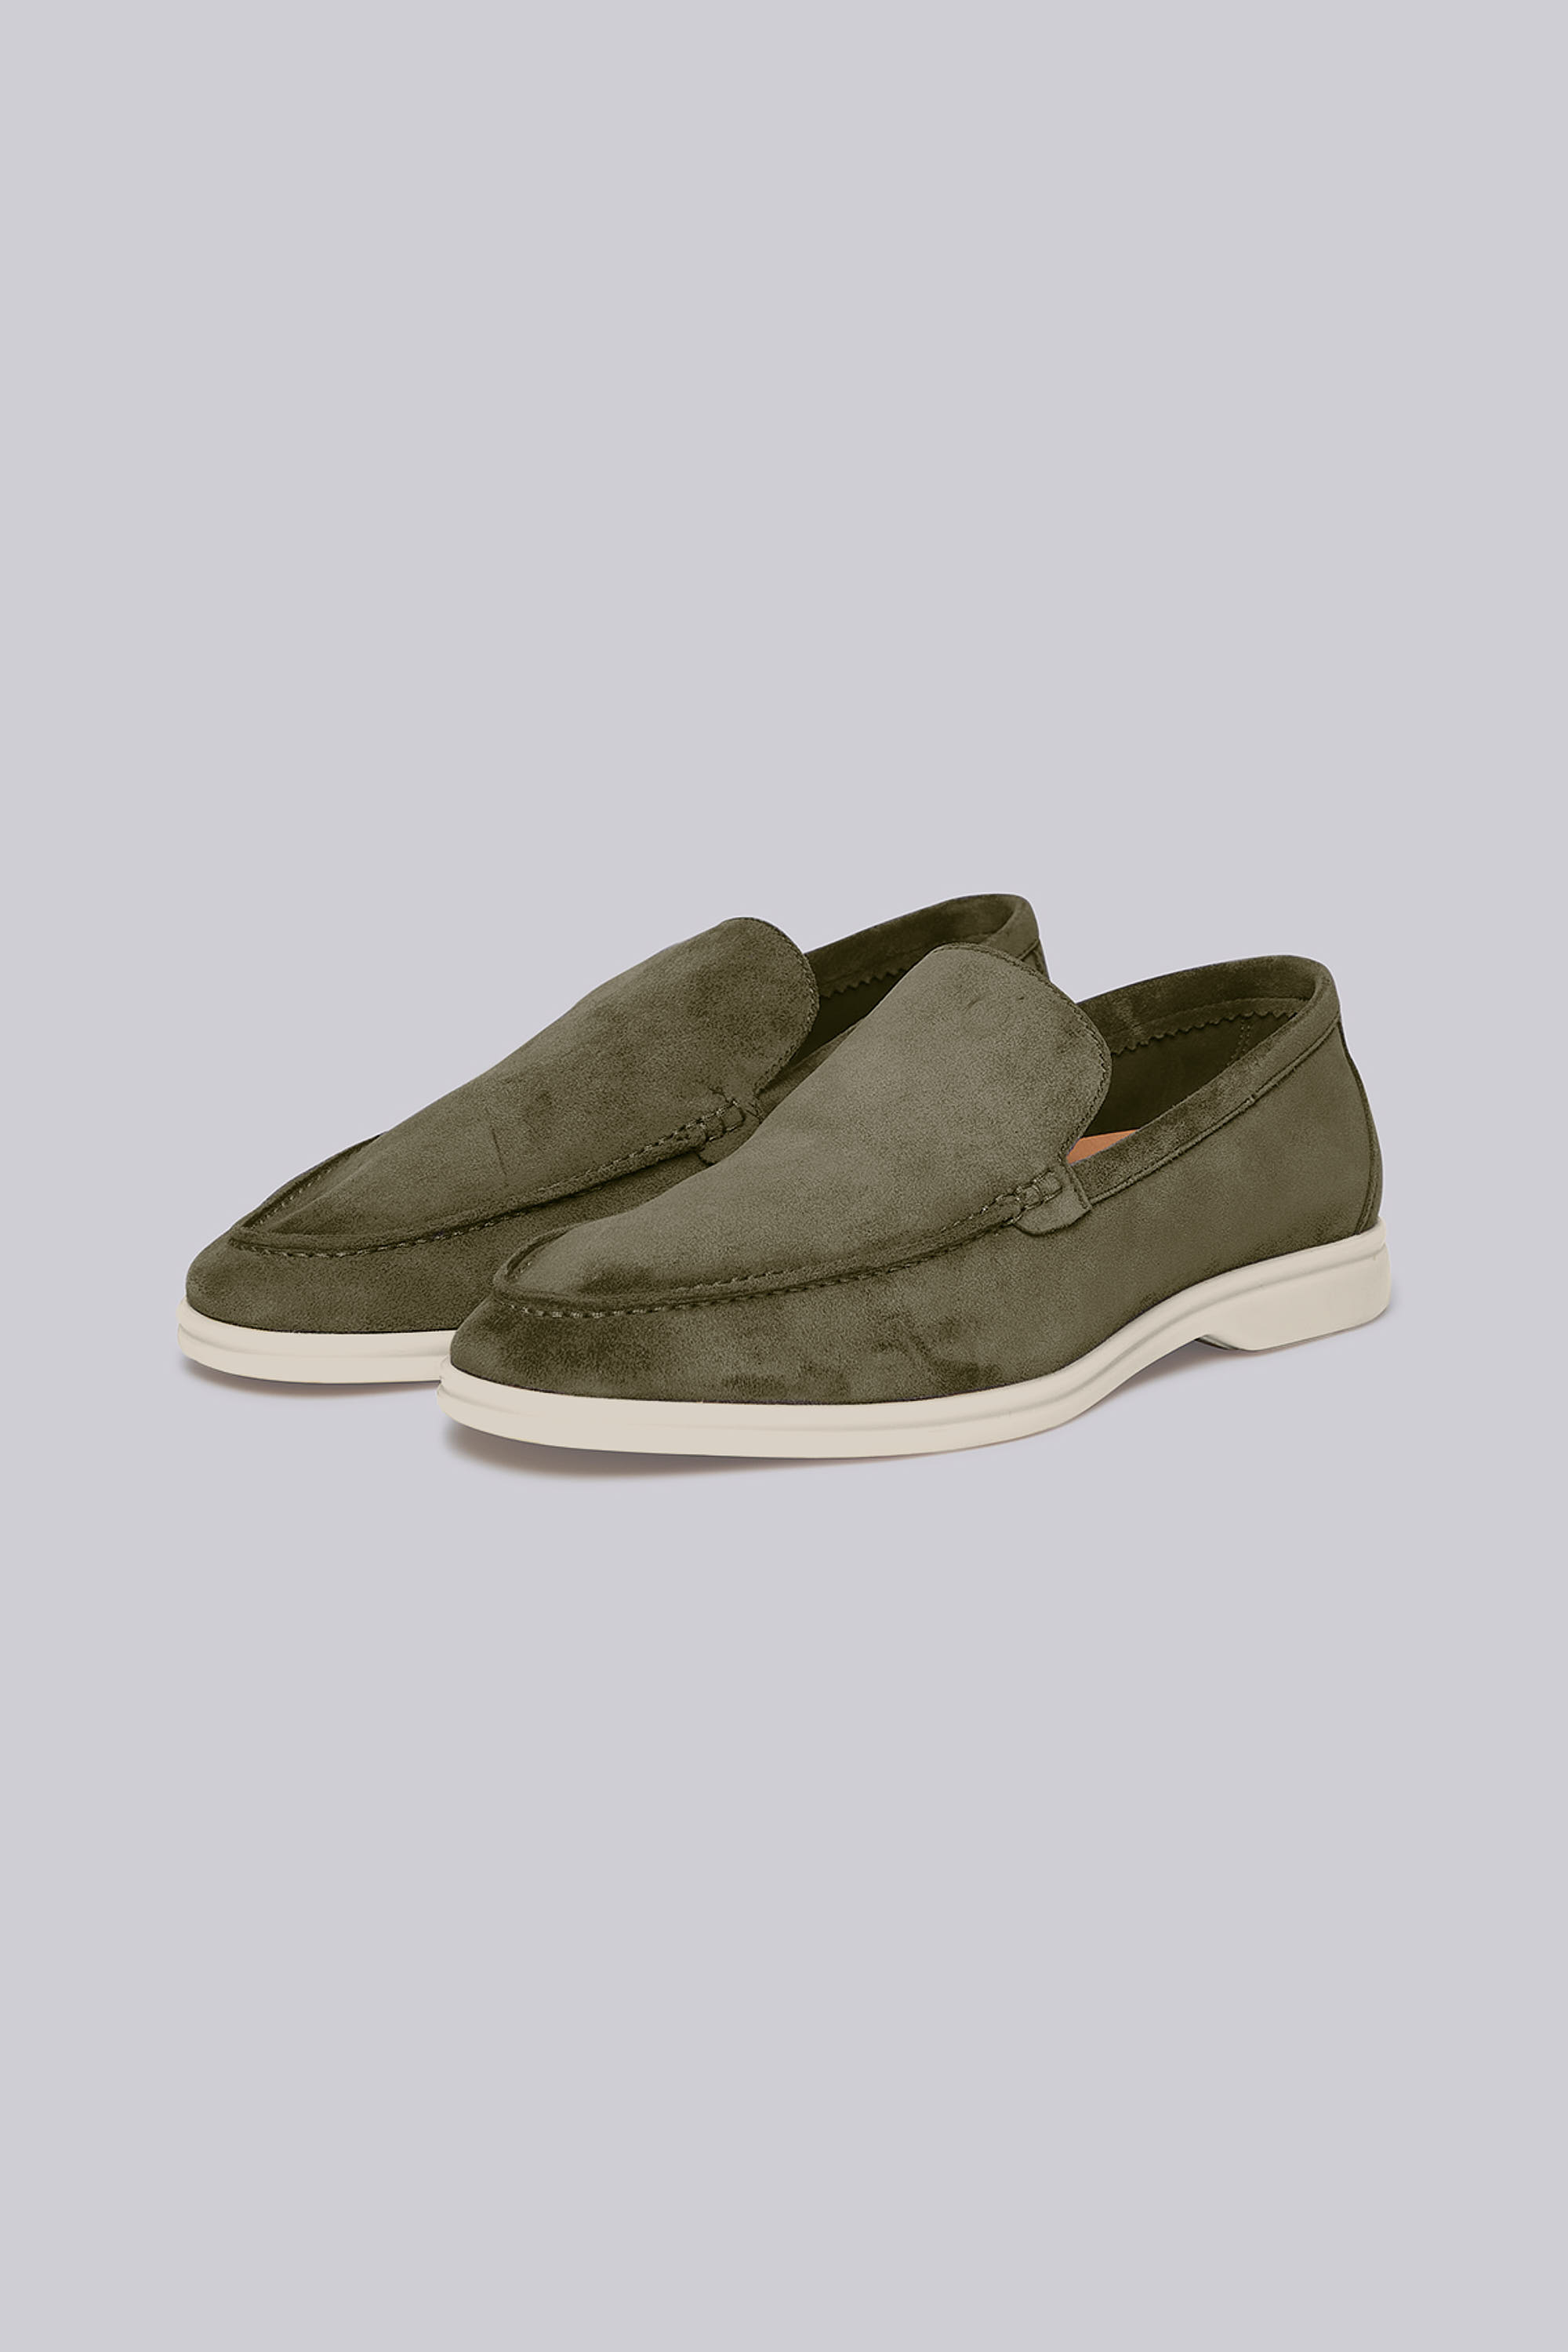 Loro Piana Walking Shoes - Thoughts/Reviews? | Page 5 | Styleforum